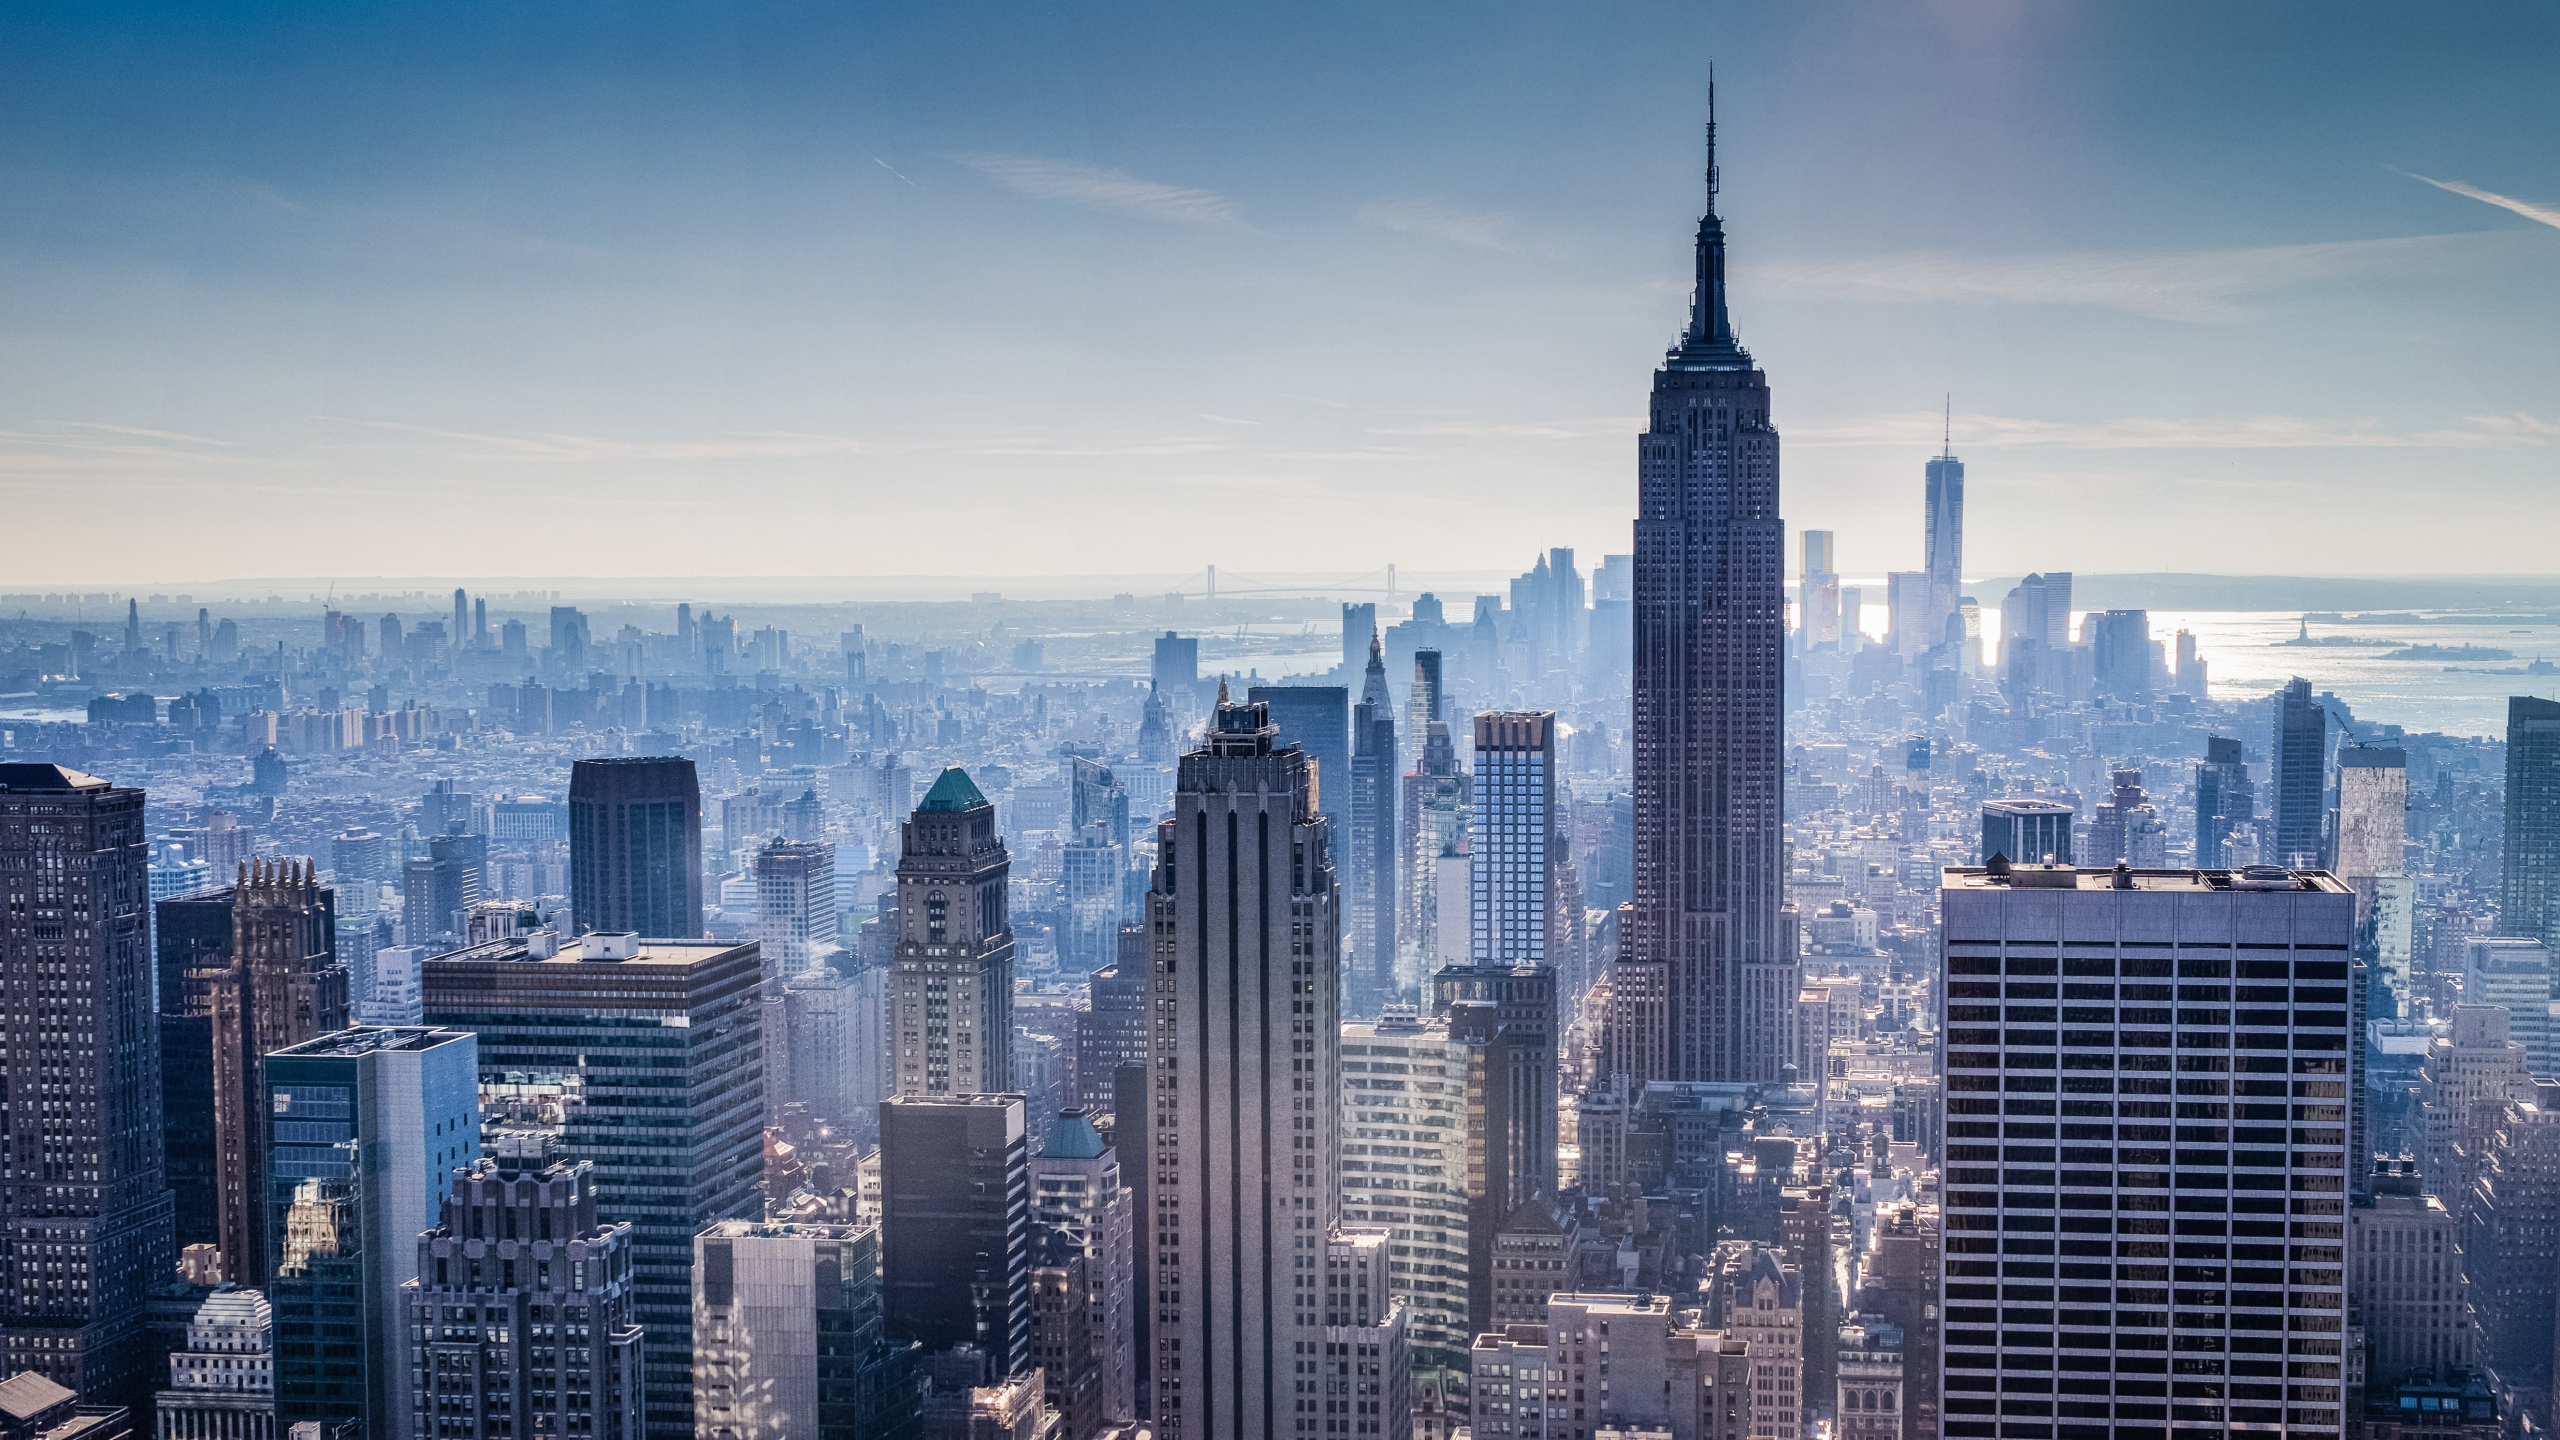 Download 2560x1440 wallpaper new york, city, skyscrapers, empire state building, dual wide, widescreen 16: widescreen, 2560x1440 HD image, background, 7758